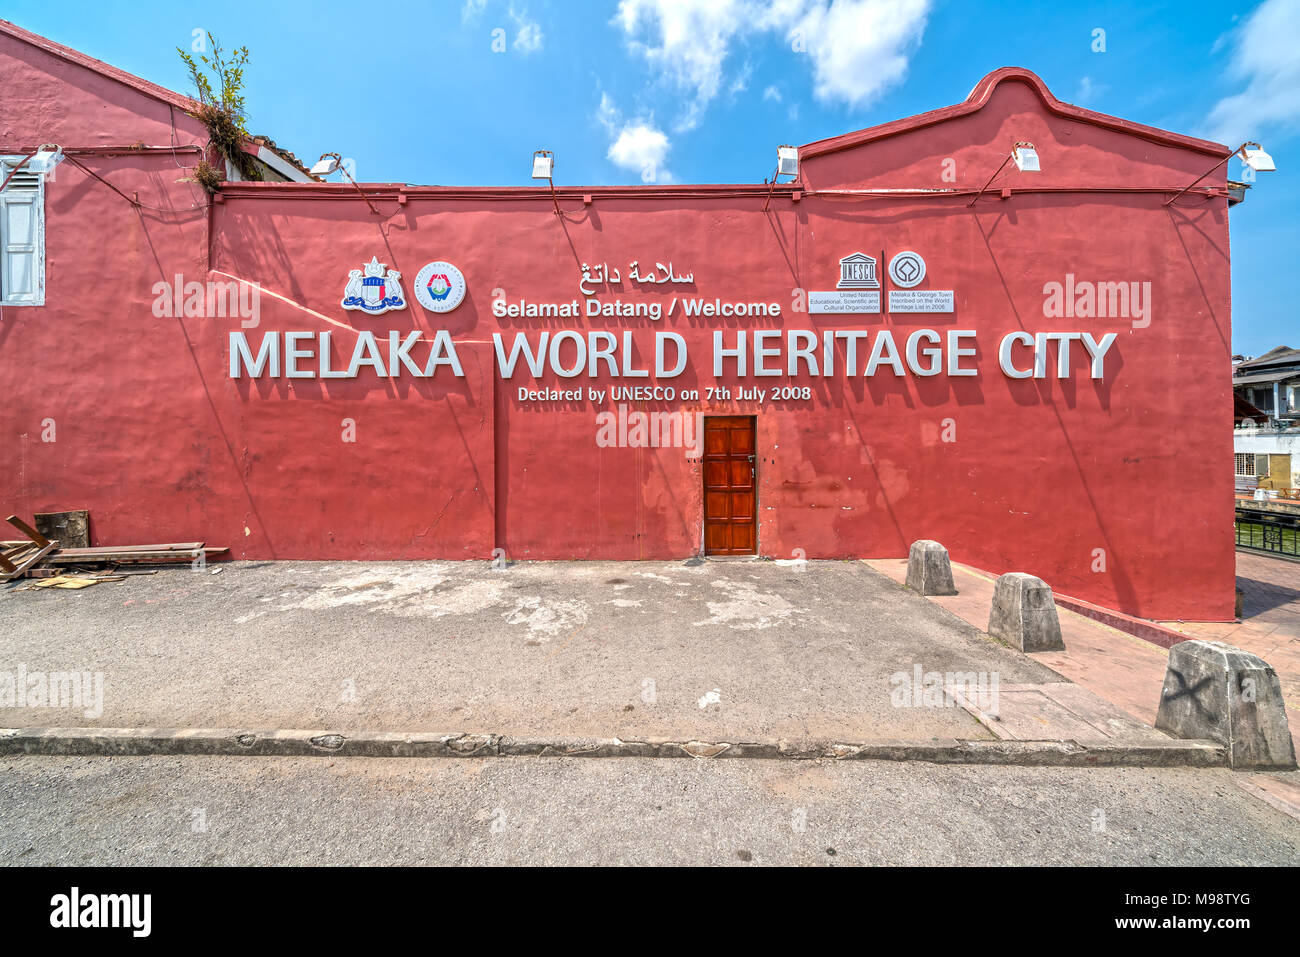 MALACCA, MALAYSIA - FEBRUARY 22, 2018: Malacca (Melaka) tipical red colonial building. Malacca is one of Unesco World Heritage City that located in Pe Stock Photo